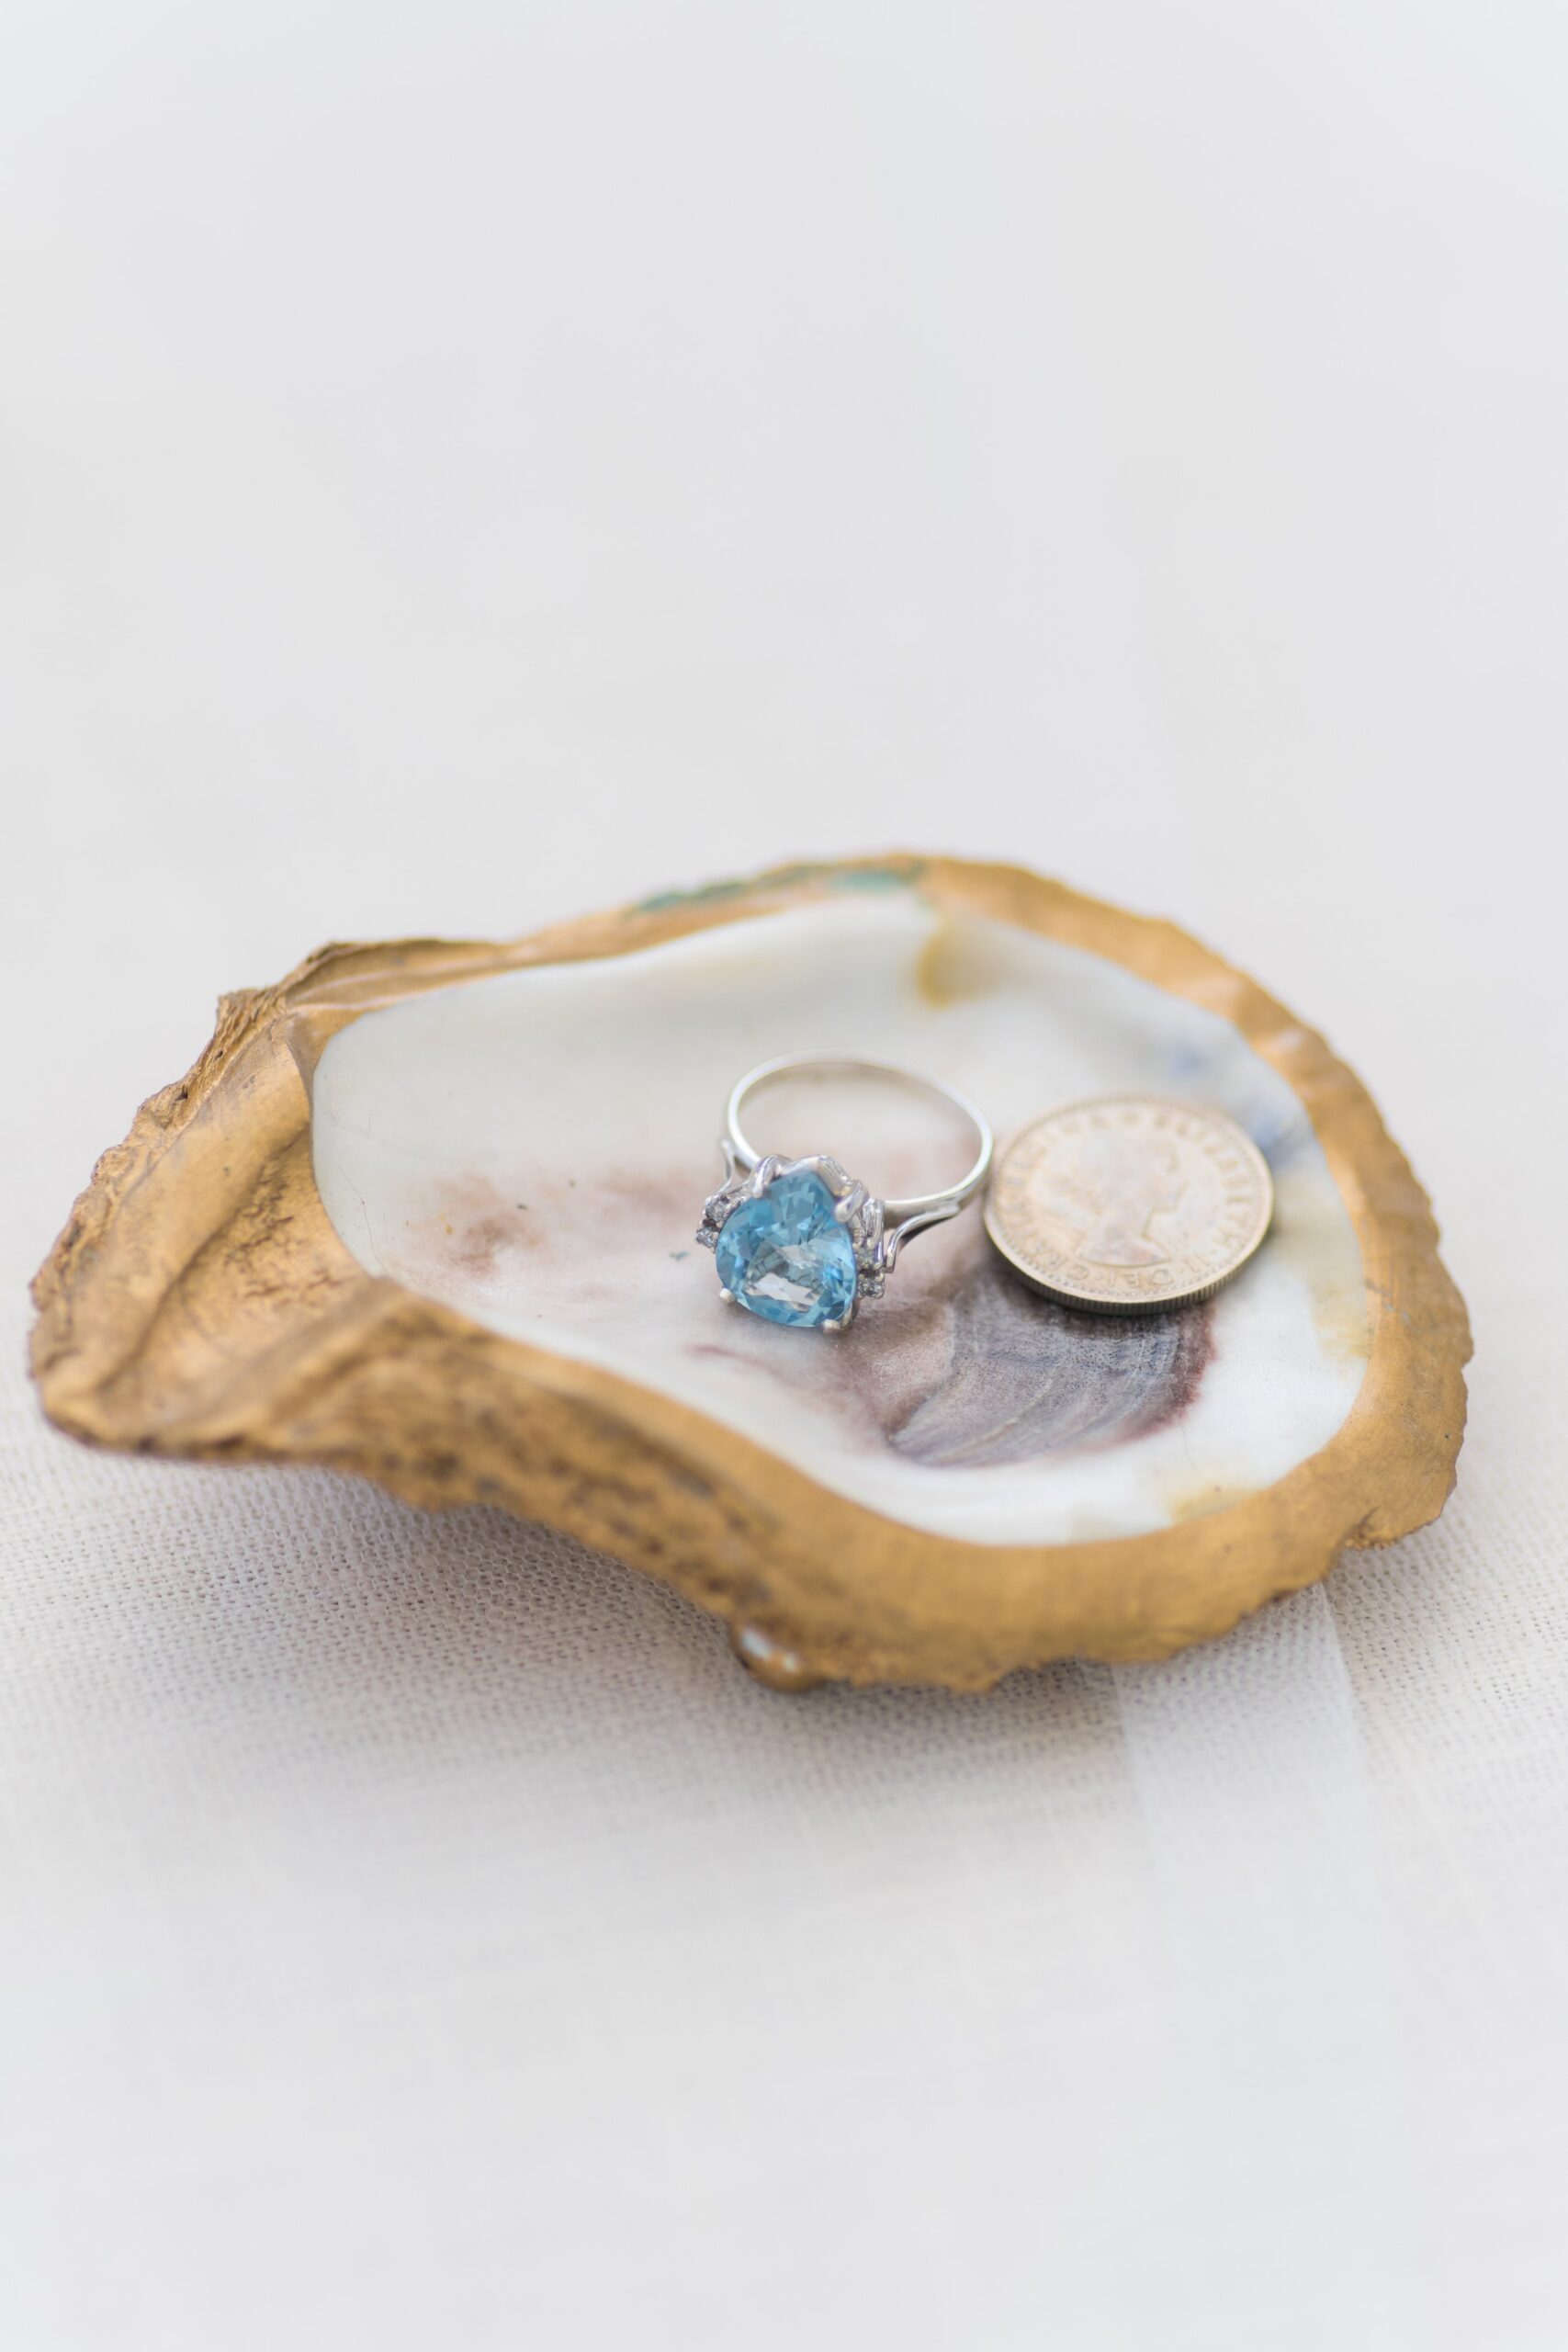 Gold painted oyster shell with heirloom ring.